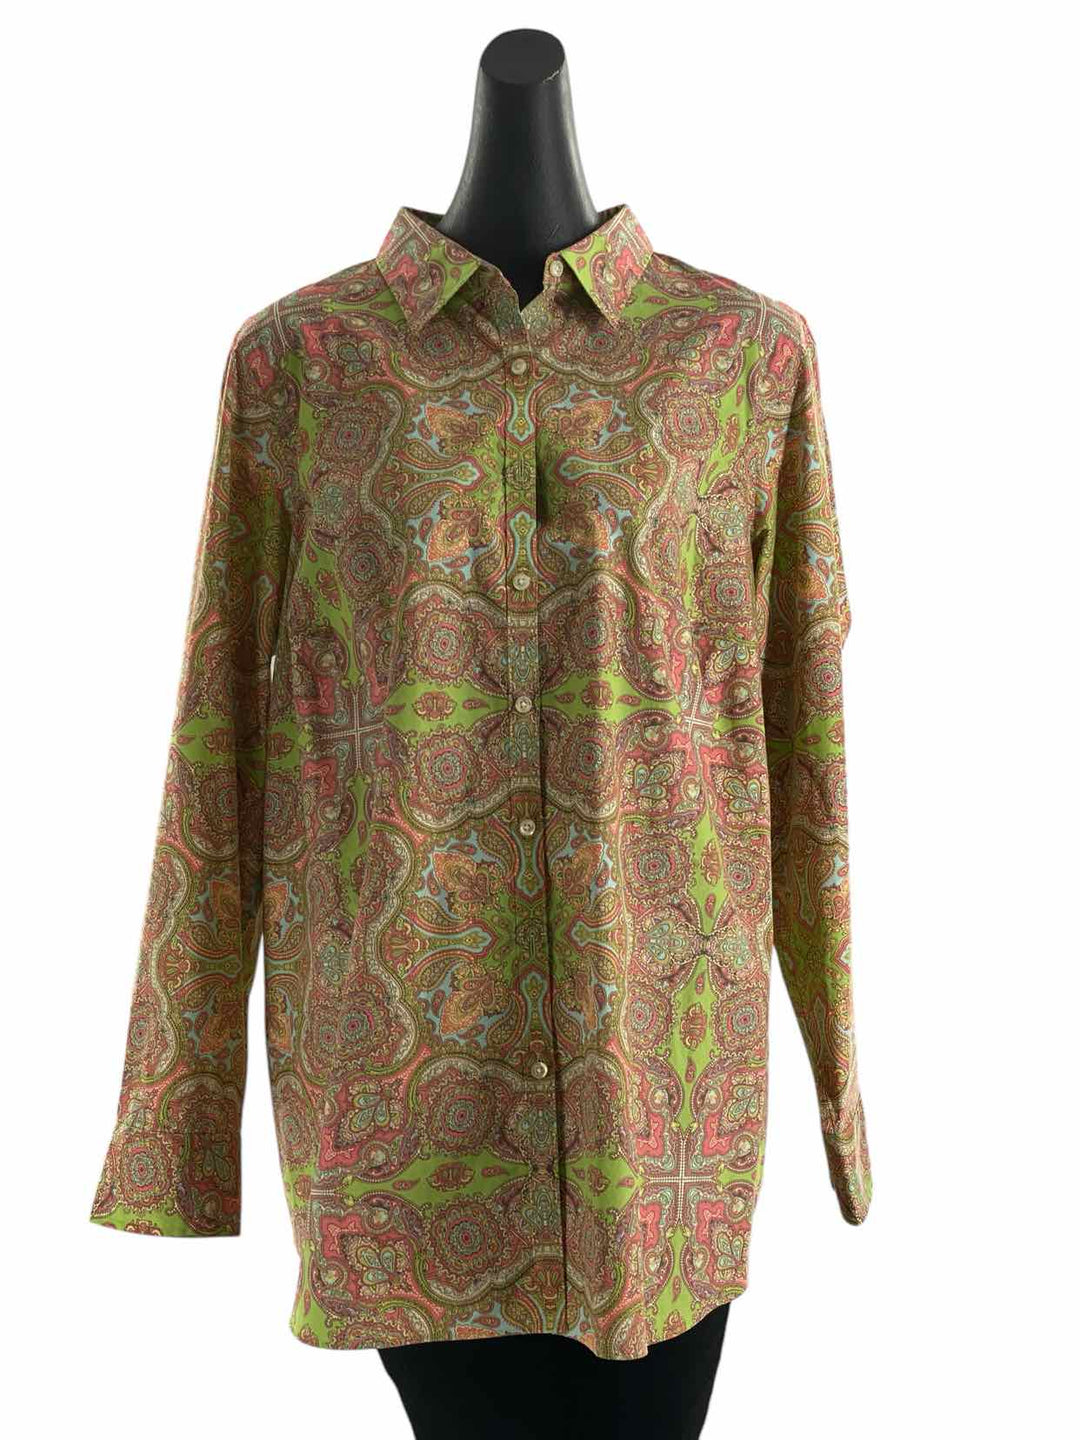 Lands End Size 22W Lime Green Multi Print Long Sleeve Shirts